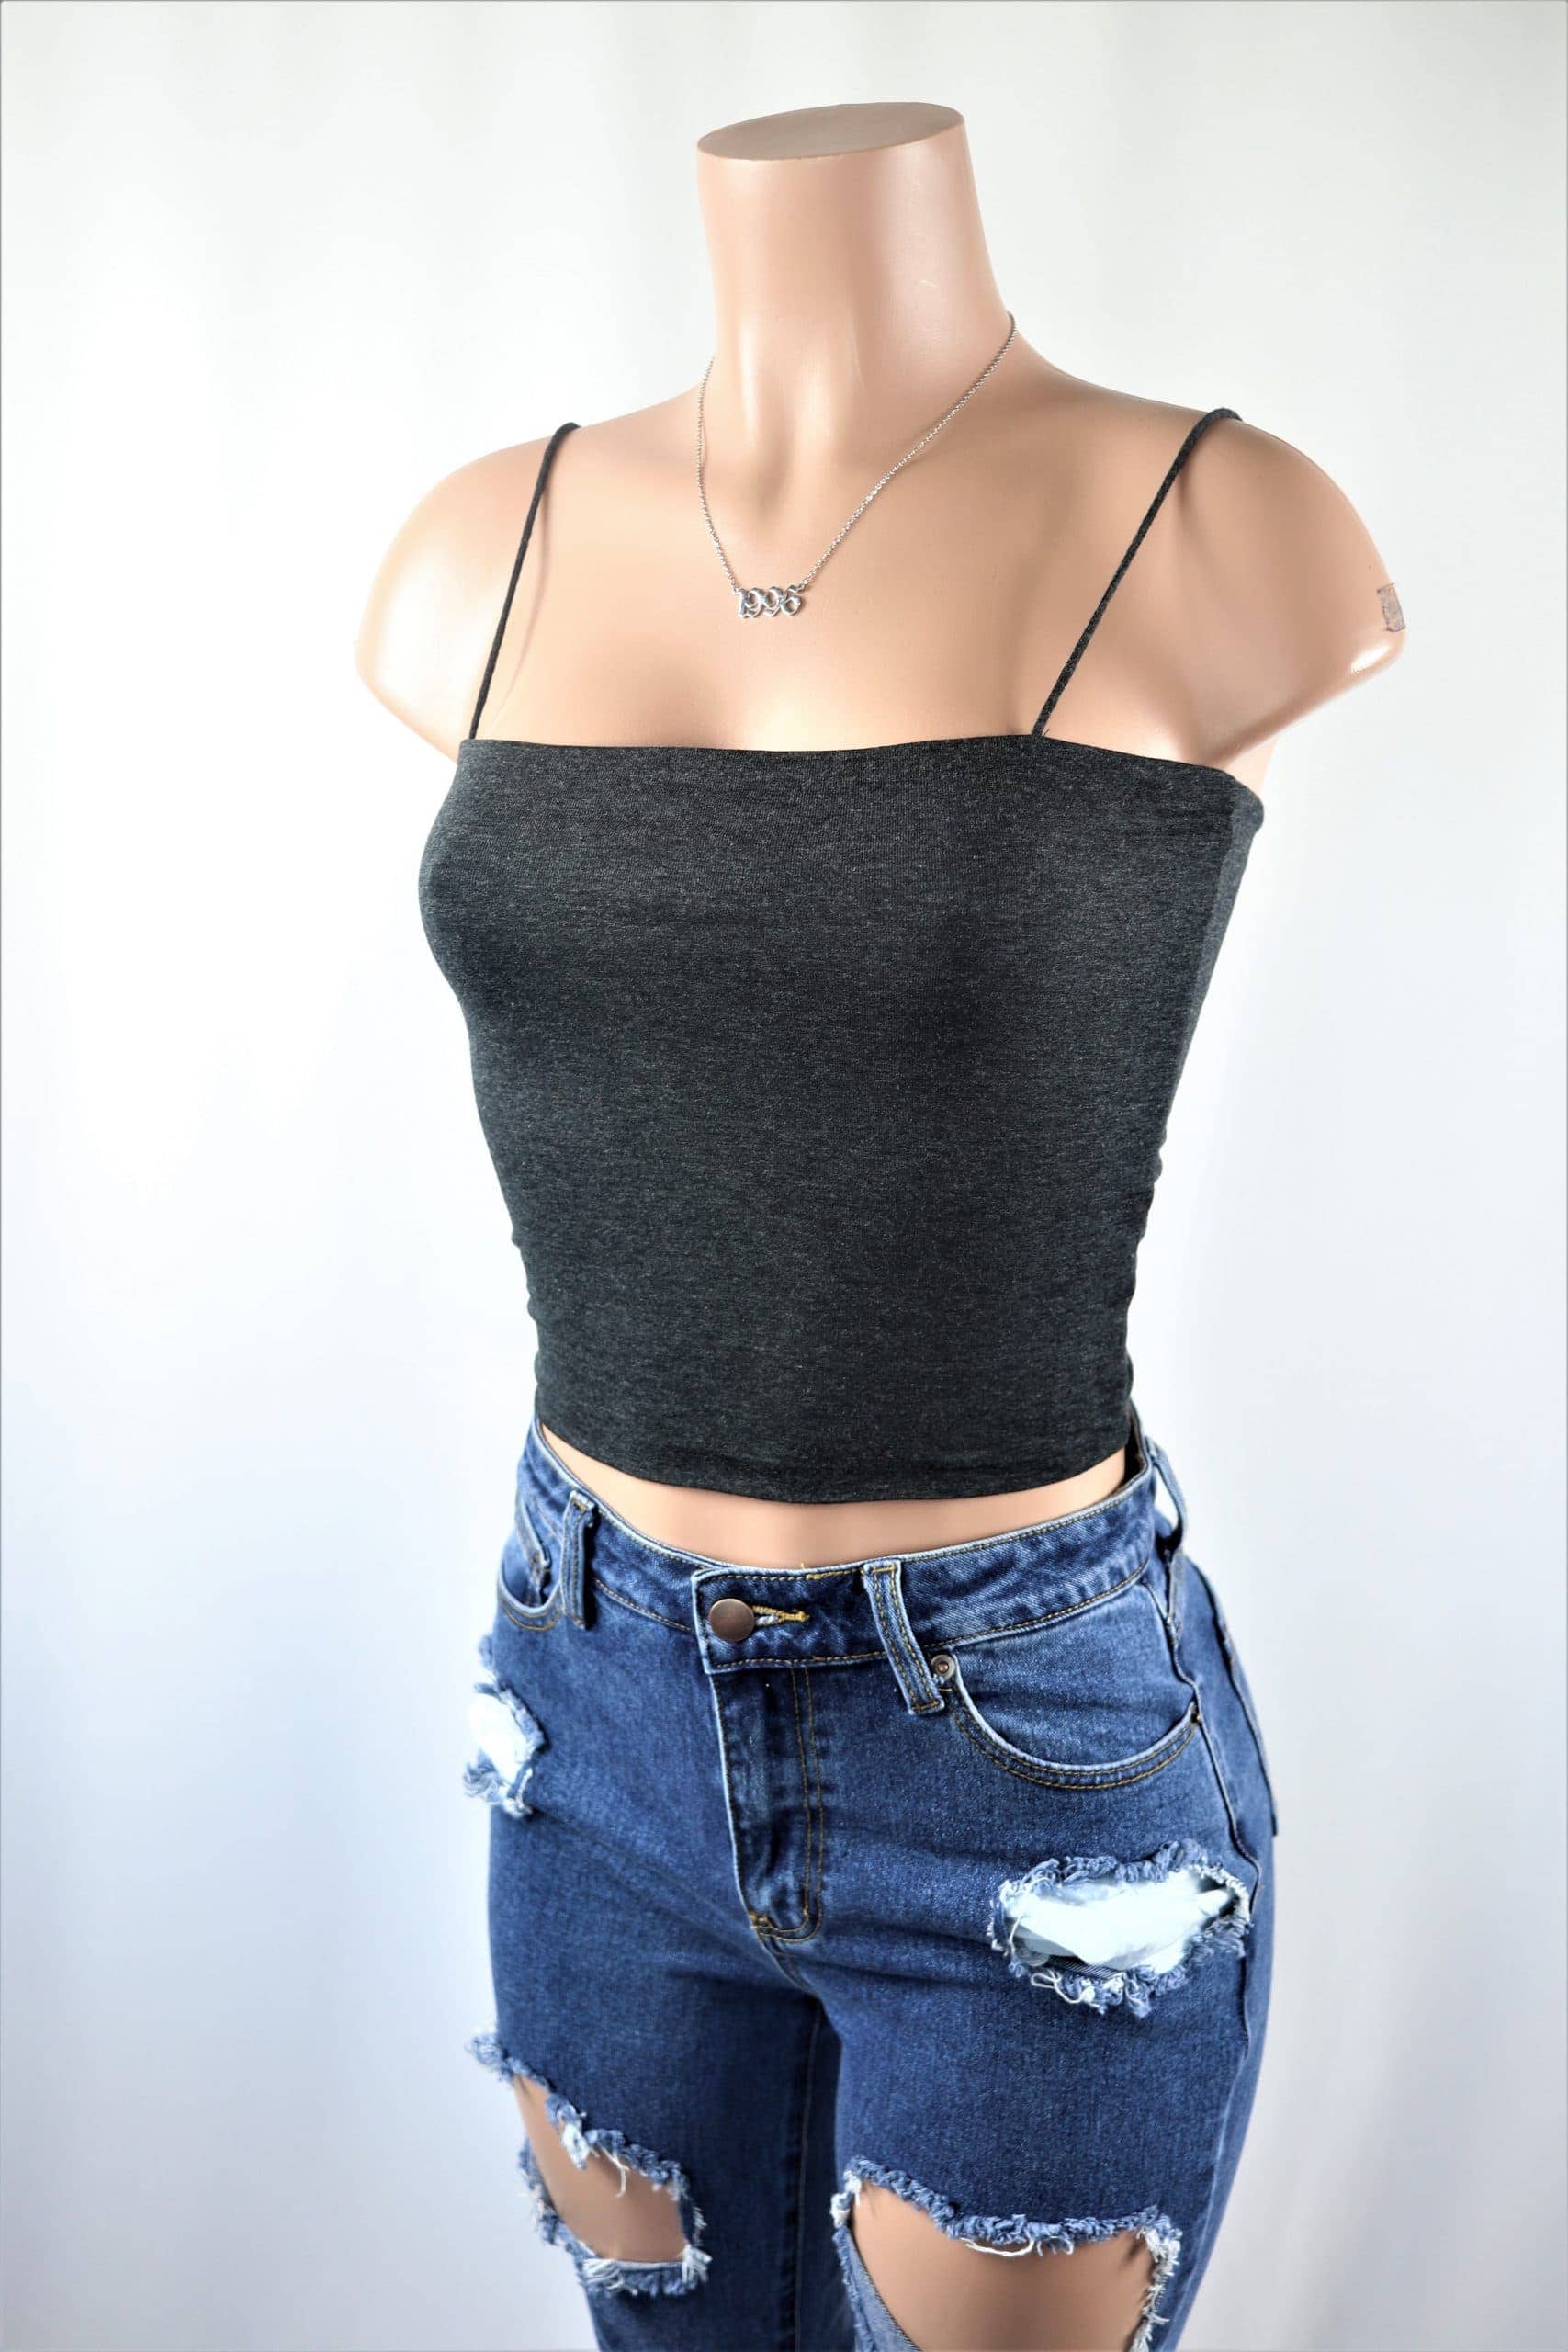 Fave Basic Crop Top - Plain double lined spaghetti strap crop top